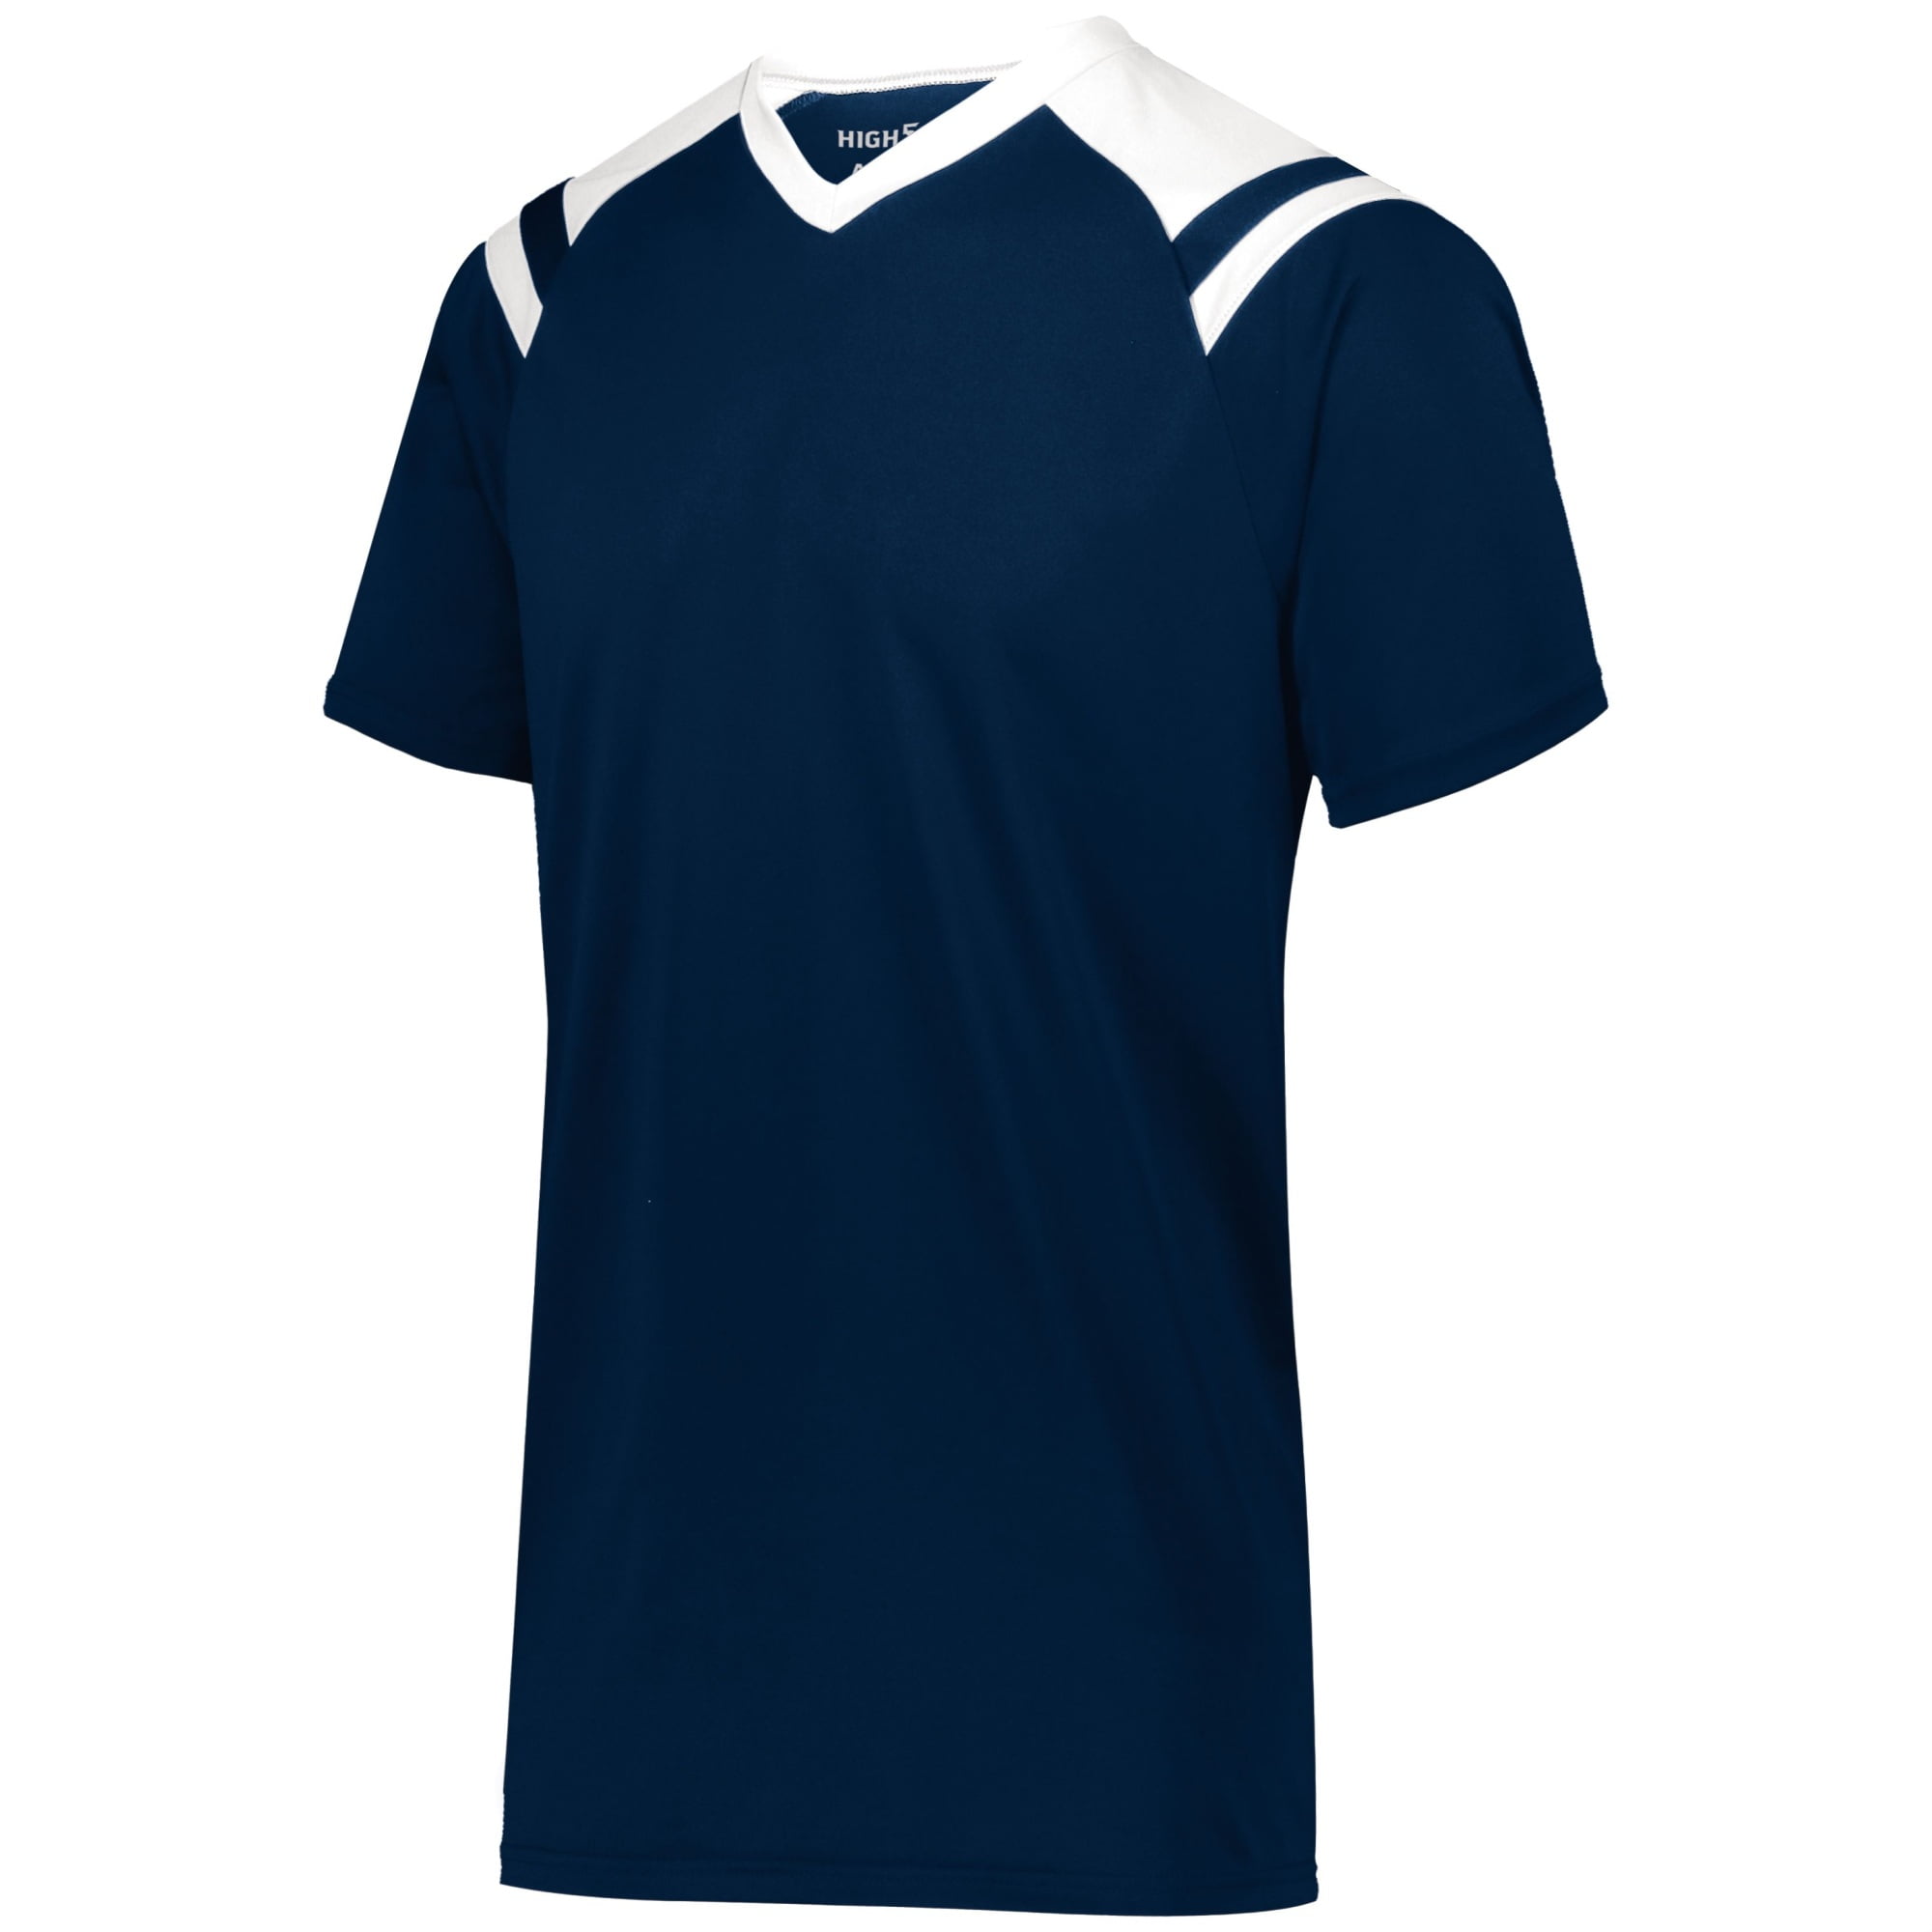 YOUTH SHEFFIELD JERSEY - M / NAVY/WHITE by HIGH FIVE - Walmart.com